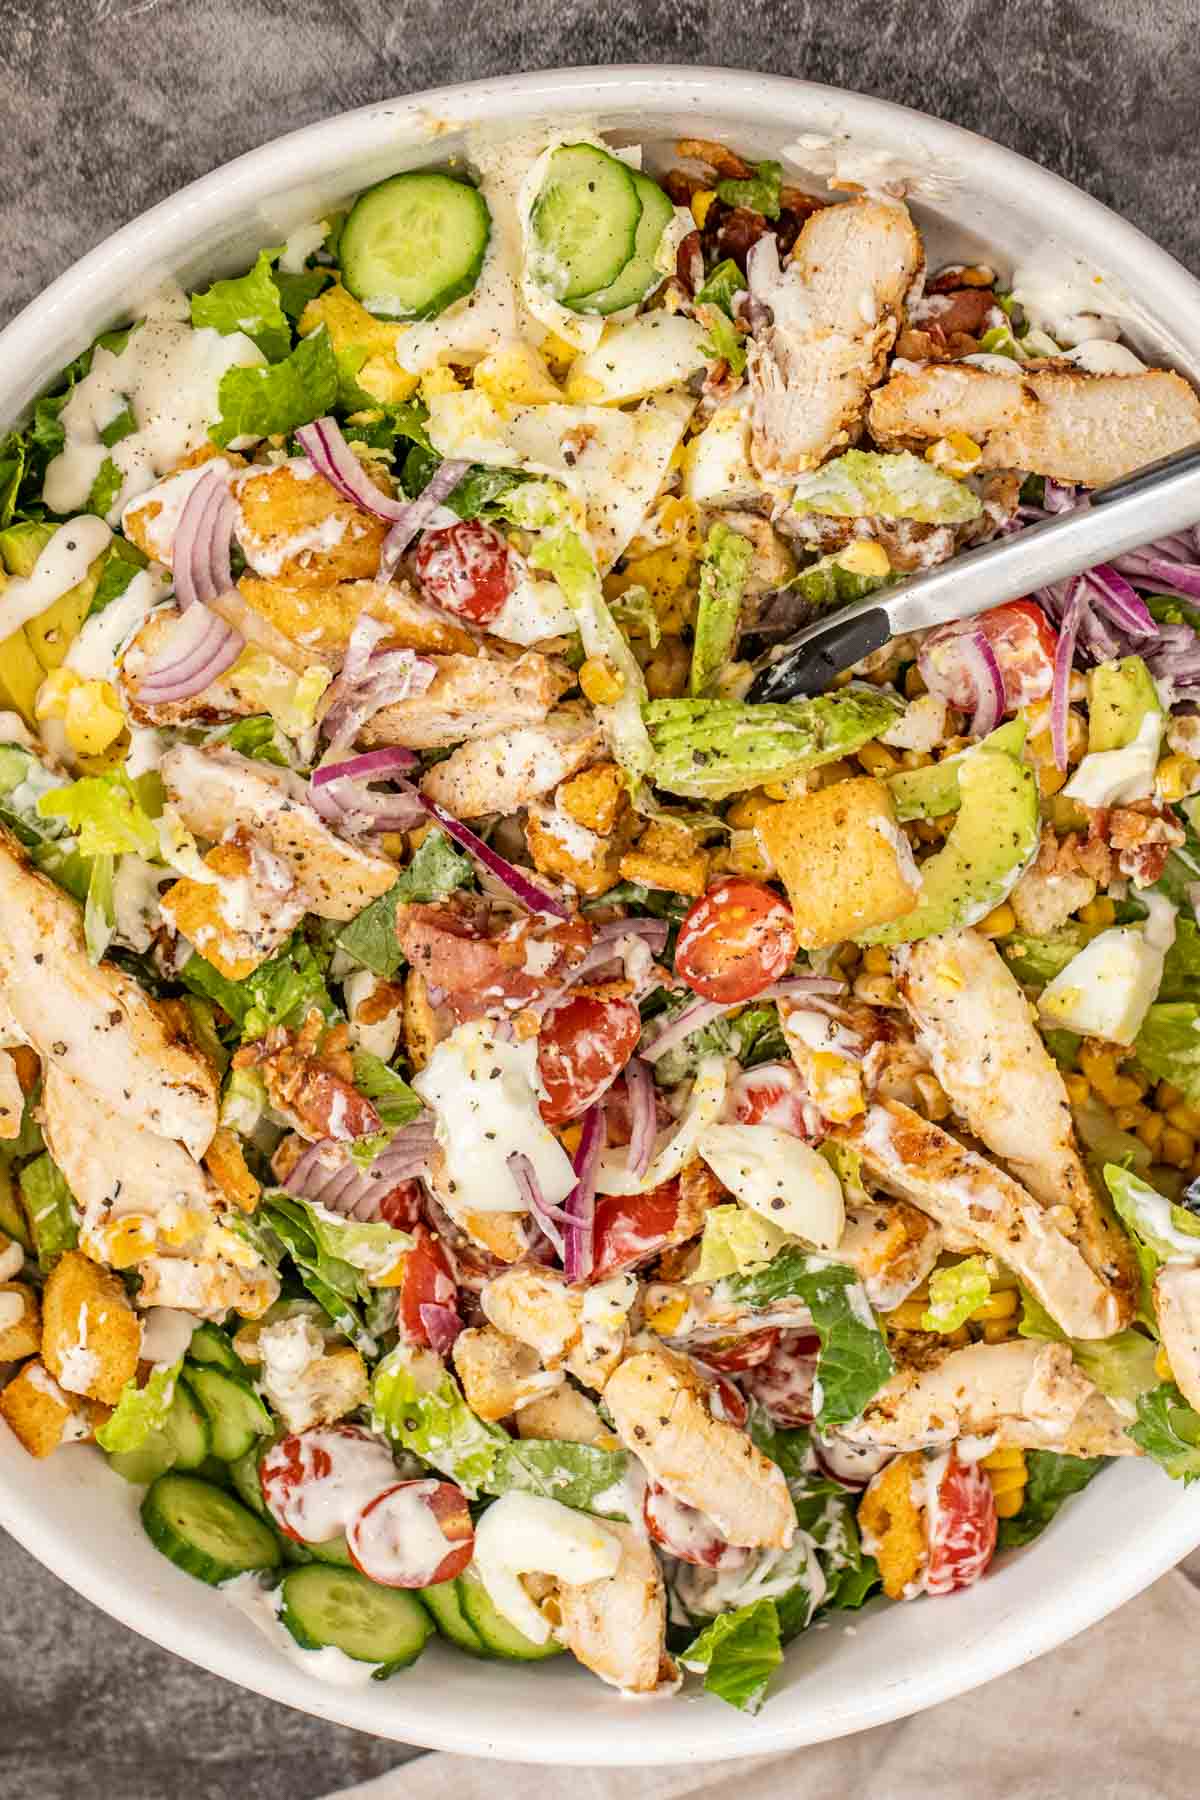 There mixed grilled chicken salad along with a pair of tongs.